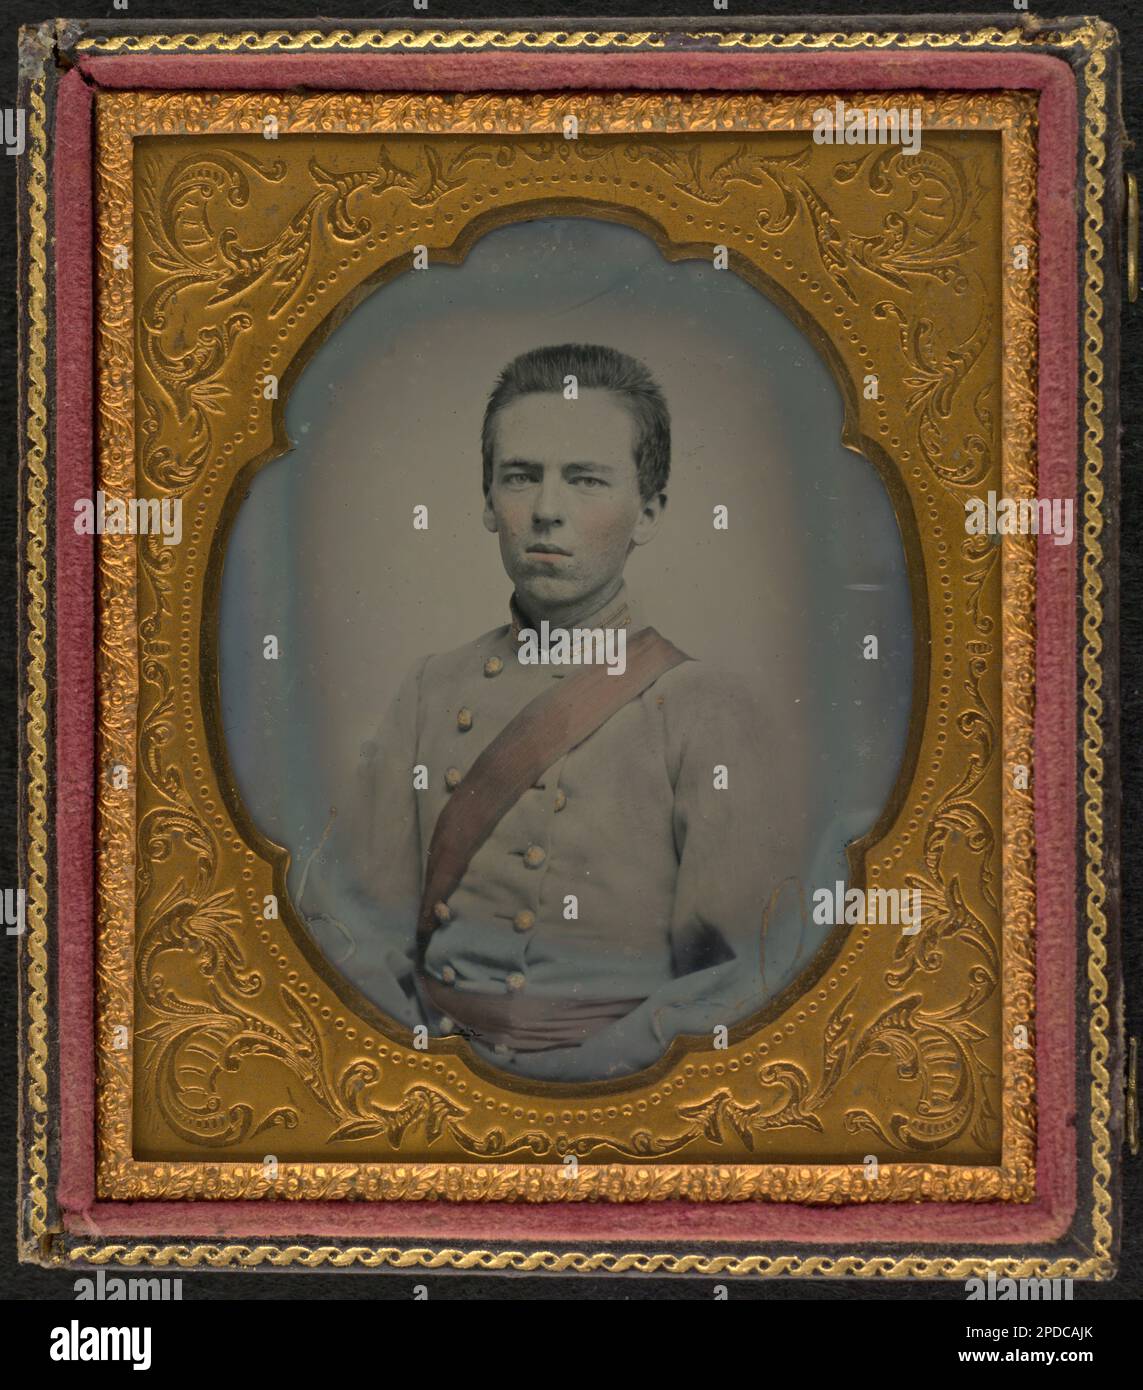 Lieutenant Parish of Virginia in uniform with Virginia buttons and two bars on collar. Liljenquist Family Collection of Civil War Photographs , FAmbrotype/Tintype photograph filing series , pp/liljconfed. Confederate States of America, Army, People, 1860-1870, Soldiers, Confederate, 1860-1870, Military uniforms, Confederate, 1860-1870, United States, History, Civil War, 1861-1865, Military personnel, Confederate. Stock Photo